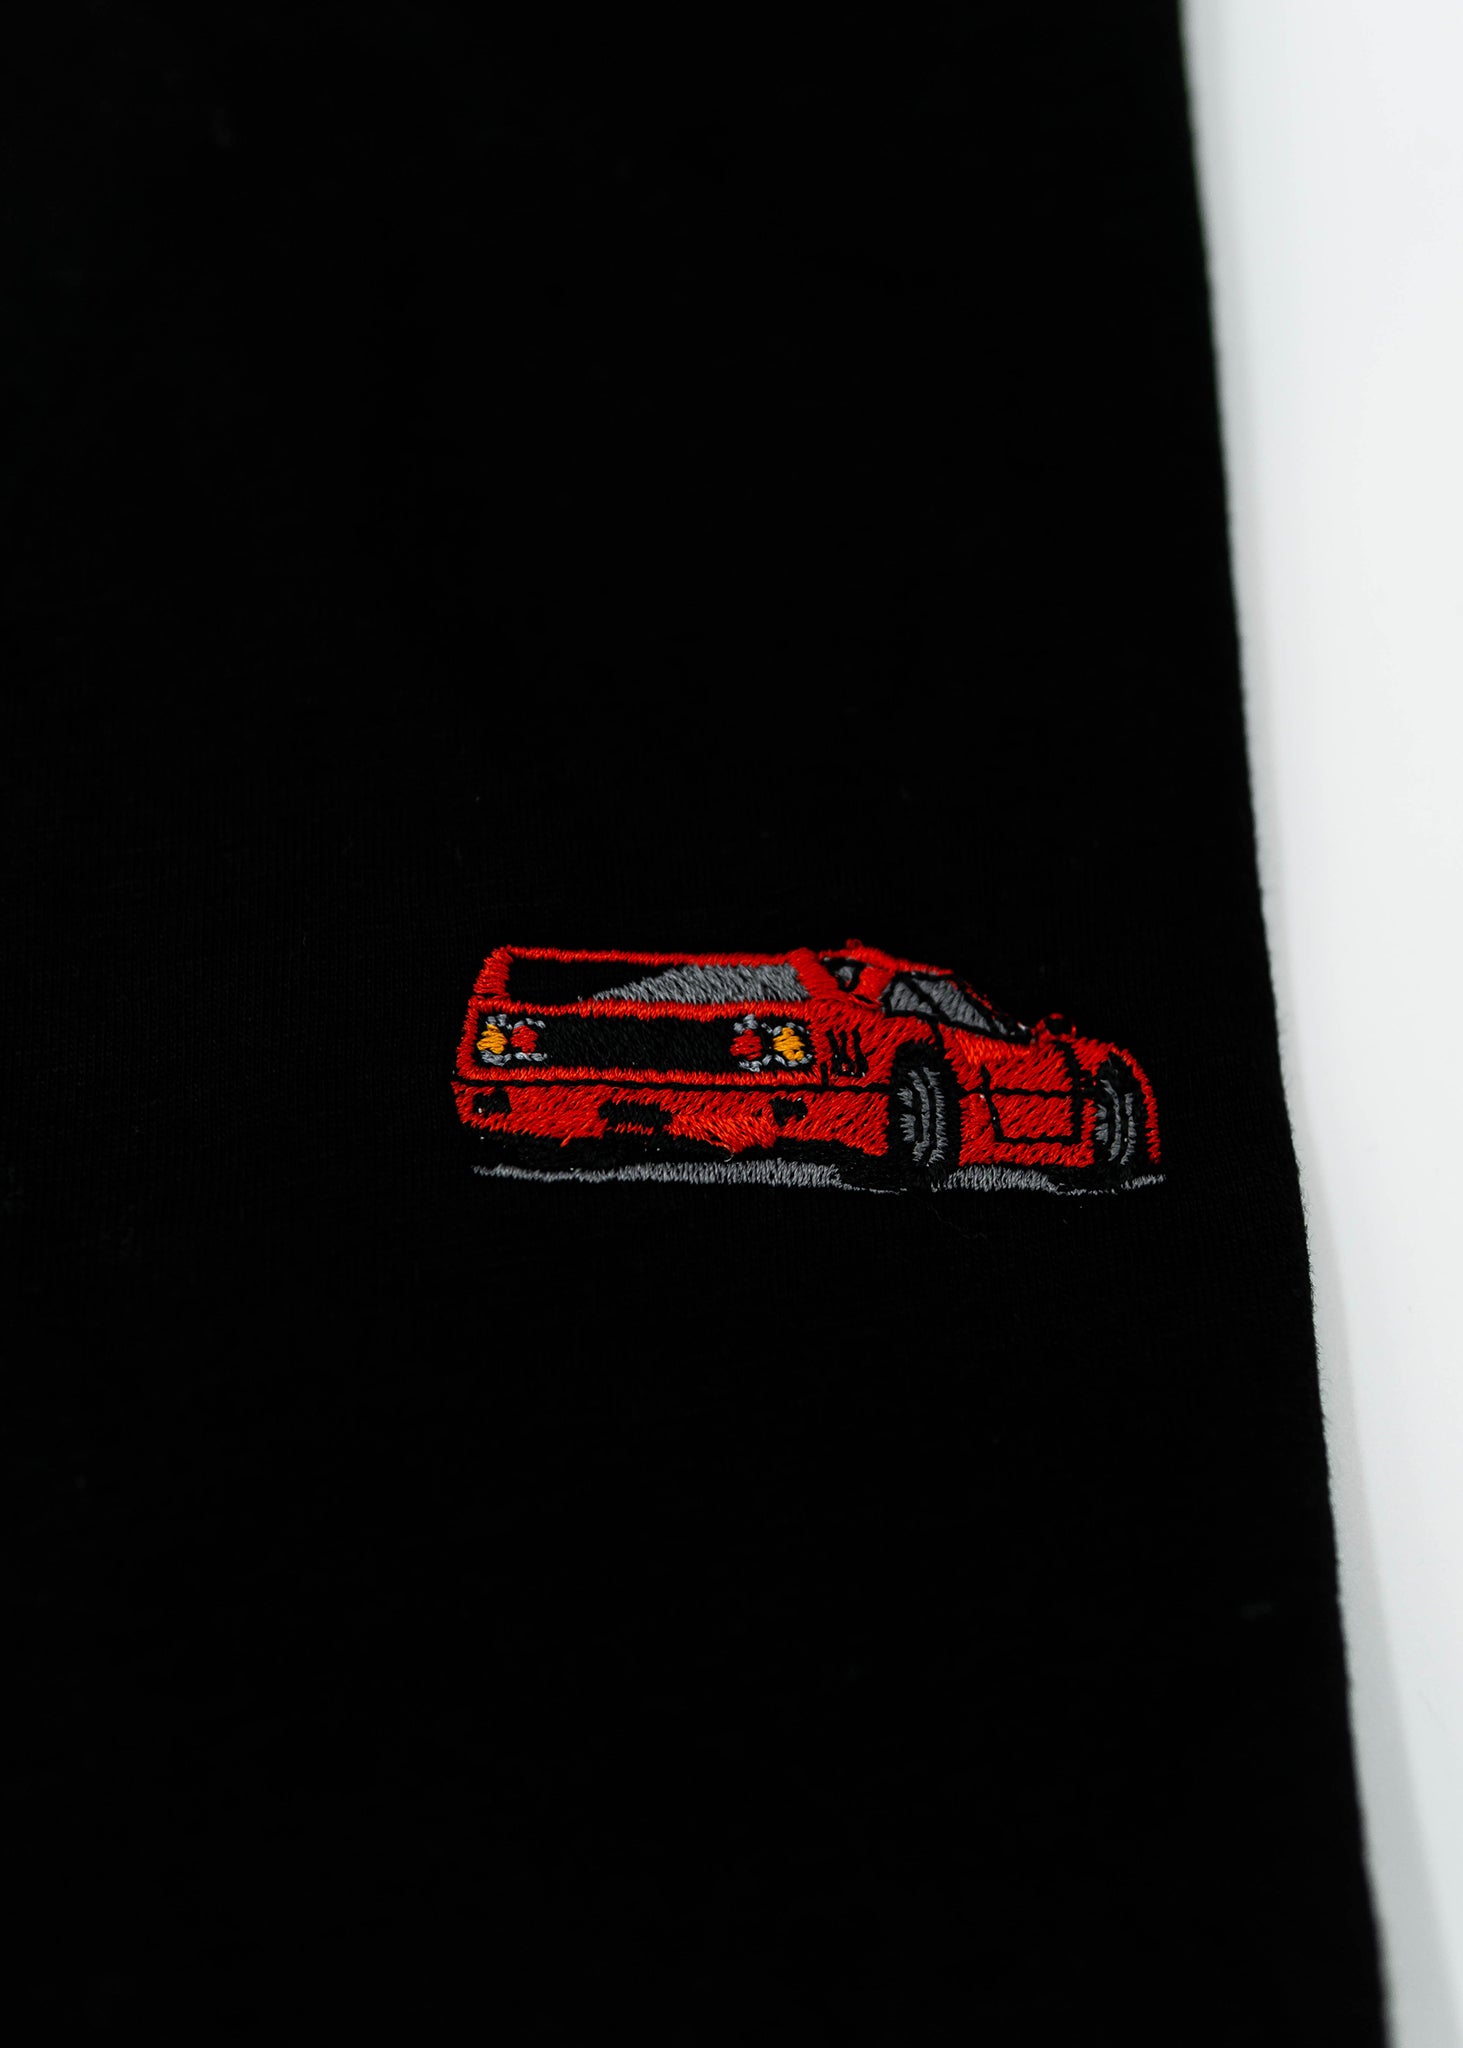 Close up of an embroidered F40 on a black men's cotton t-shirt. Photo shows the high quality detailed embroidery of a red F40. Fabric composition of the shirt is polyester and cotton. The material is very soft, stretchy, and non-transparent. The style of this t-shirt is short sleeve, round bottom, crewneck, with embroidery on the left chest.